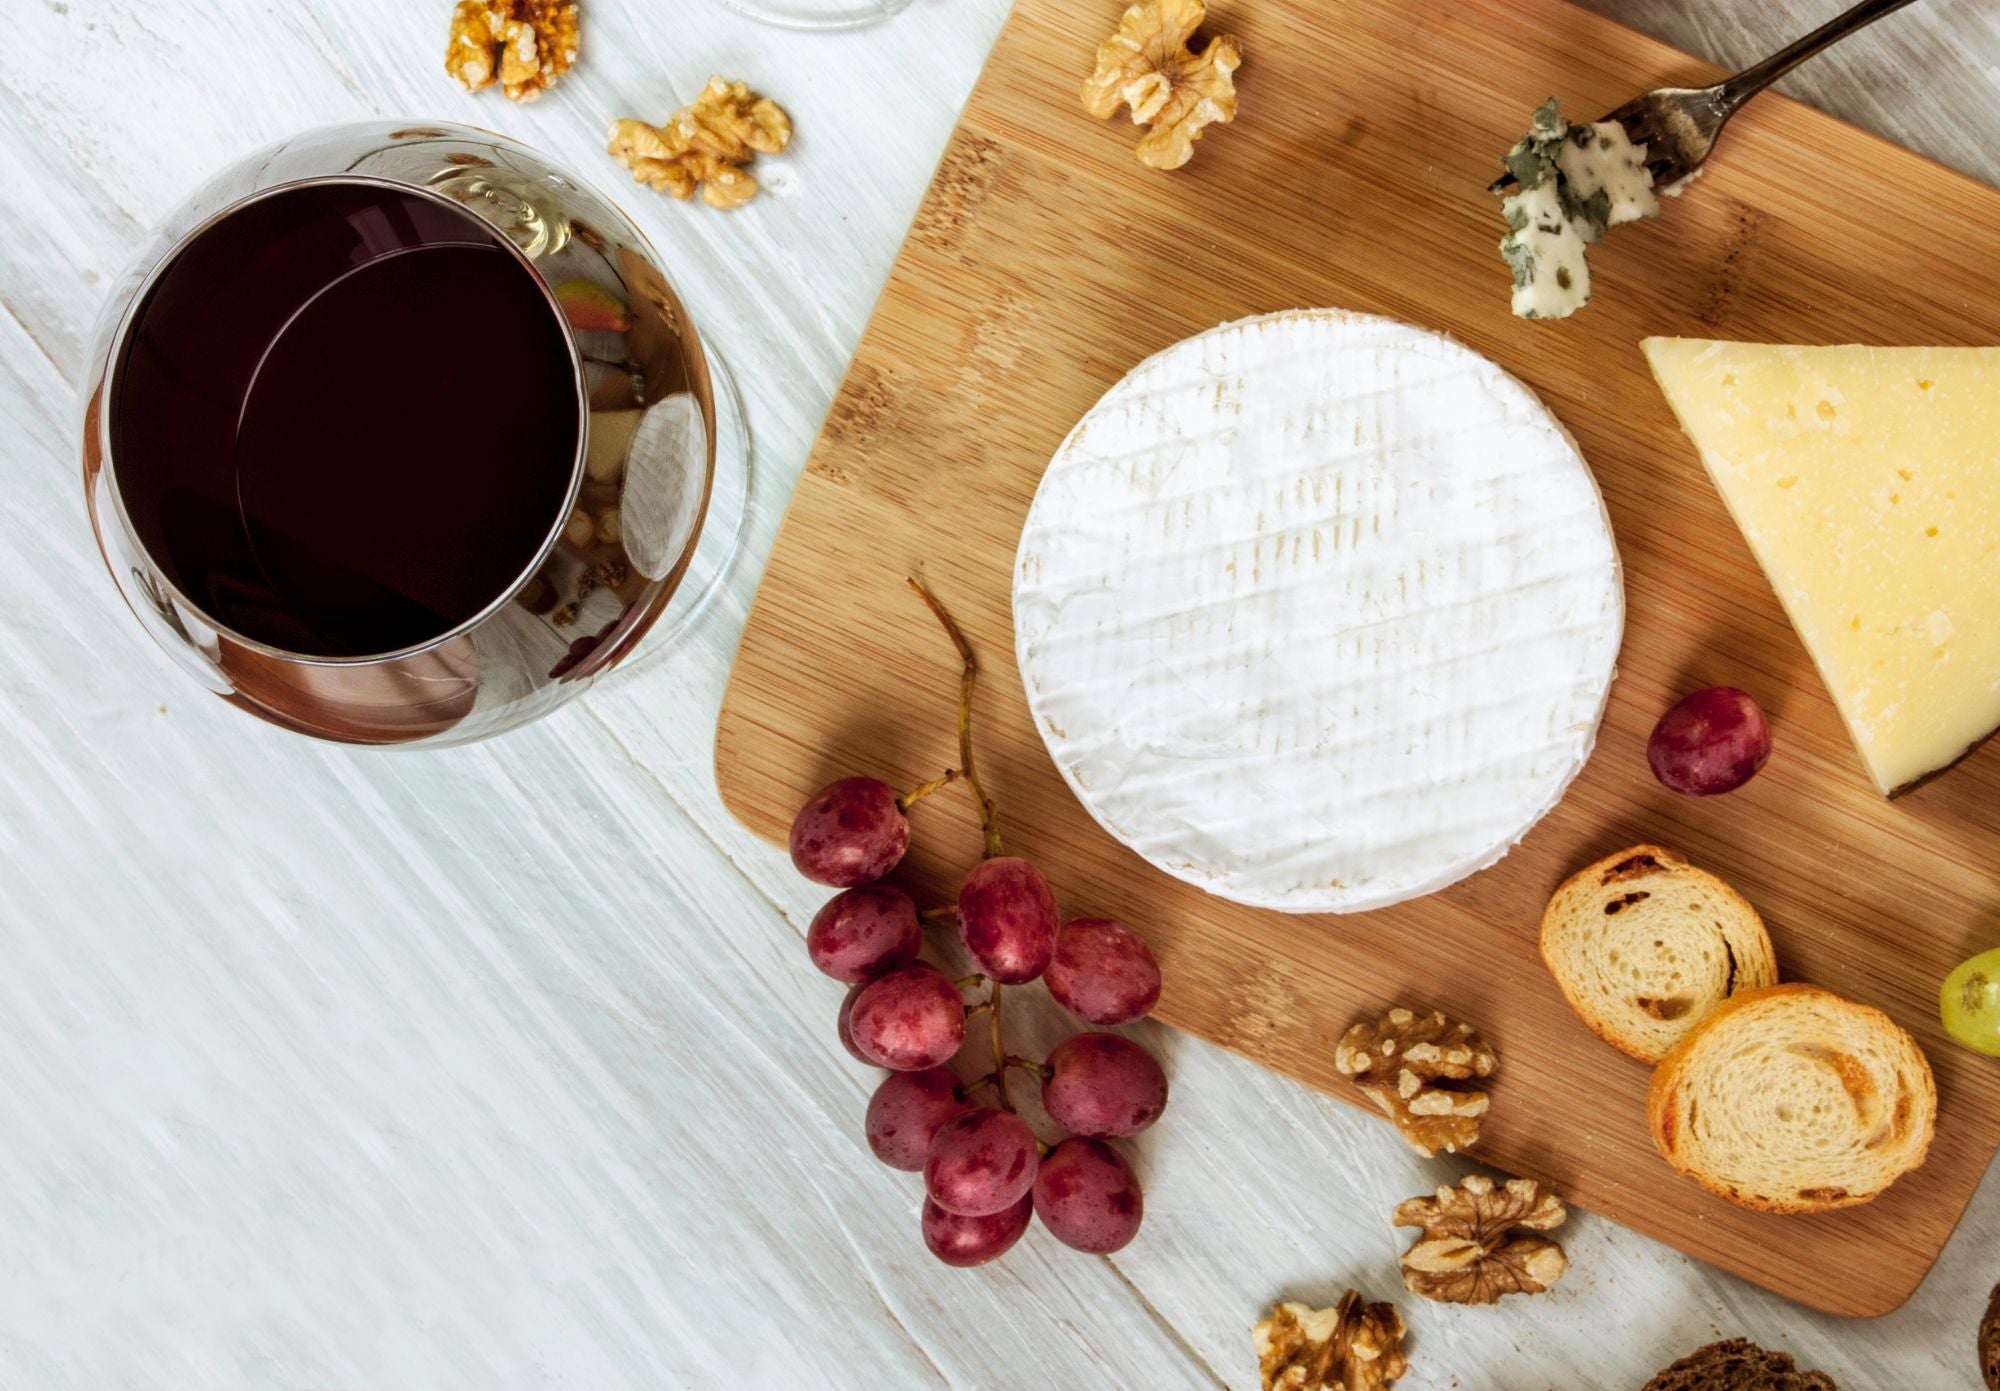 Sip and Savor: Delicious Wine and Cheese Pairings for Summer Gatherings